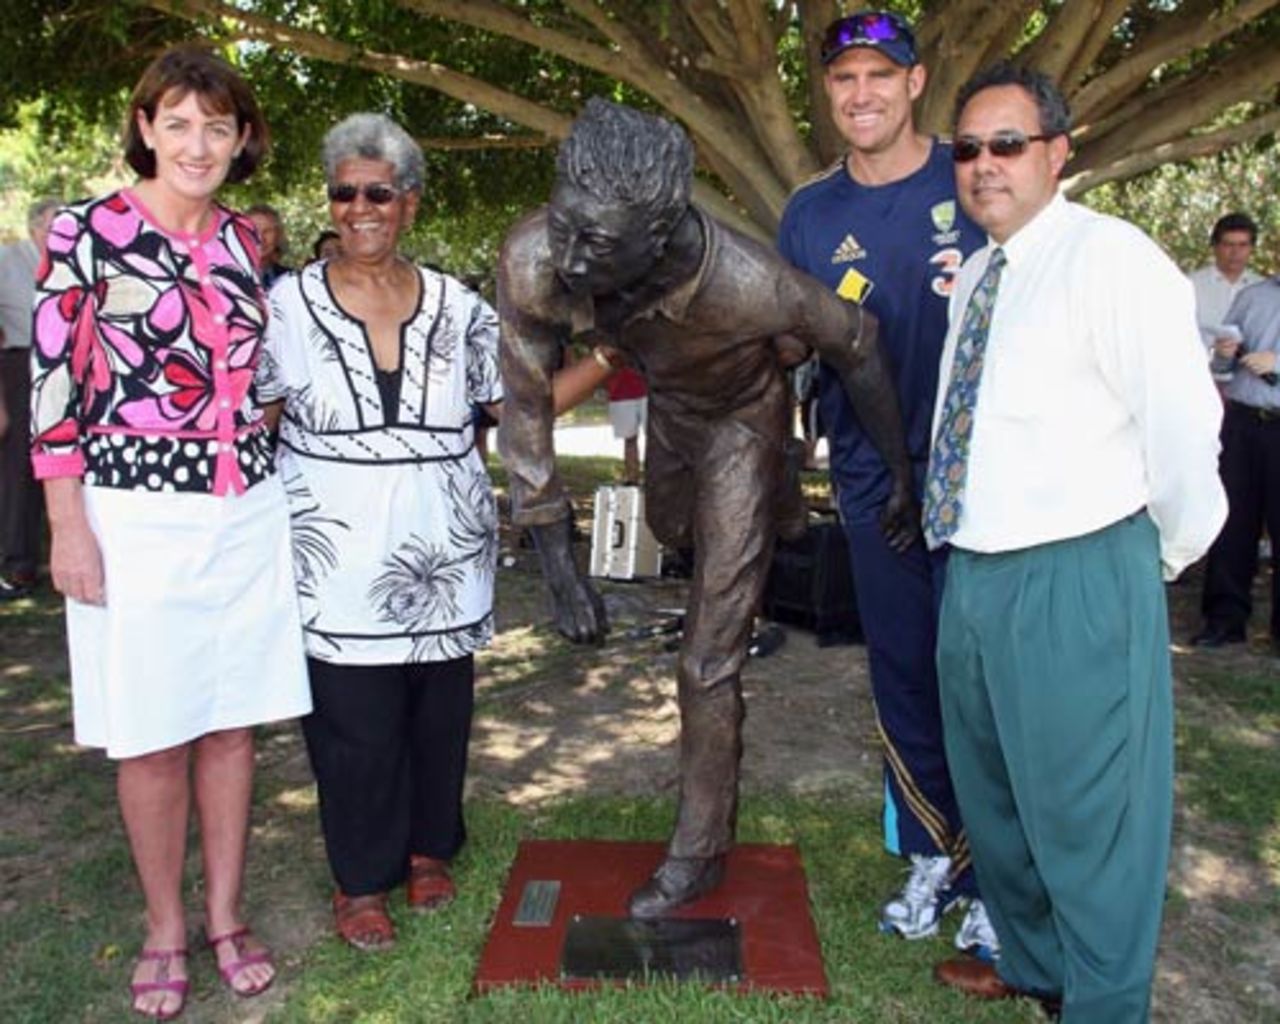 Judy Spence, Valda Coolwell, Matthew Hayden and Larry Budd pose after the unveiling of a statue of Eddie Gilbert, Allan Border Field, Brisbane, November 16, 2008